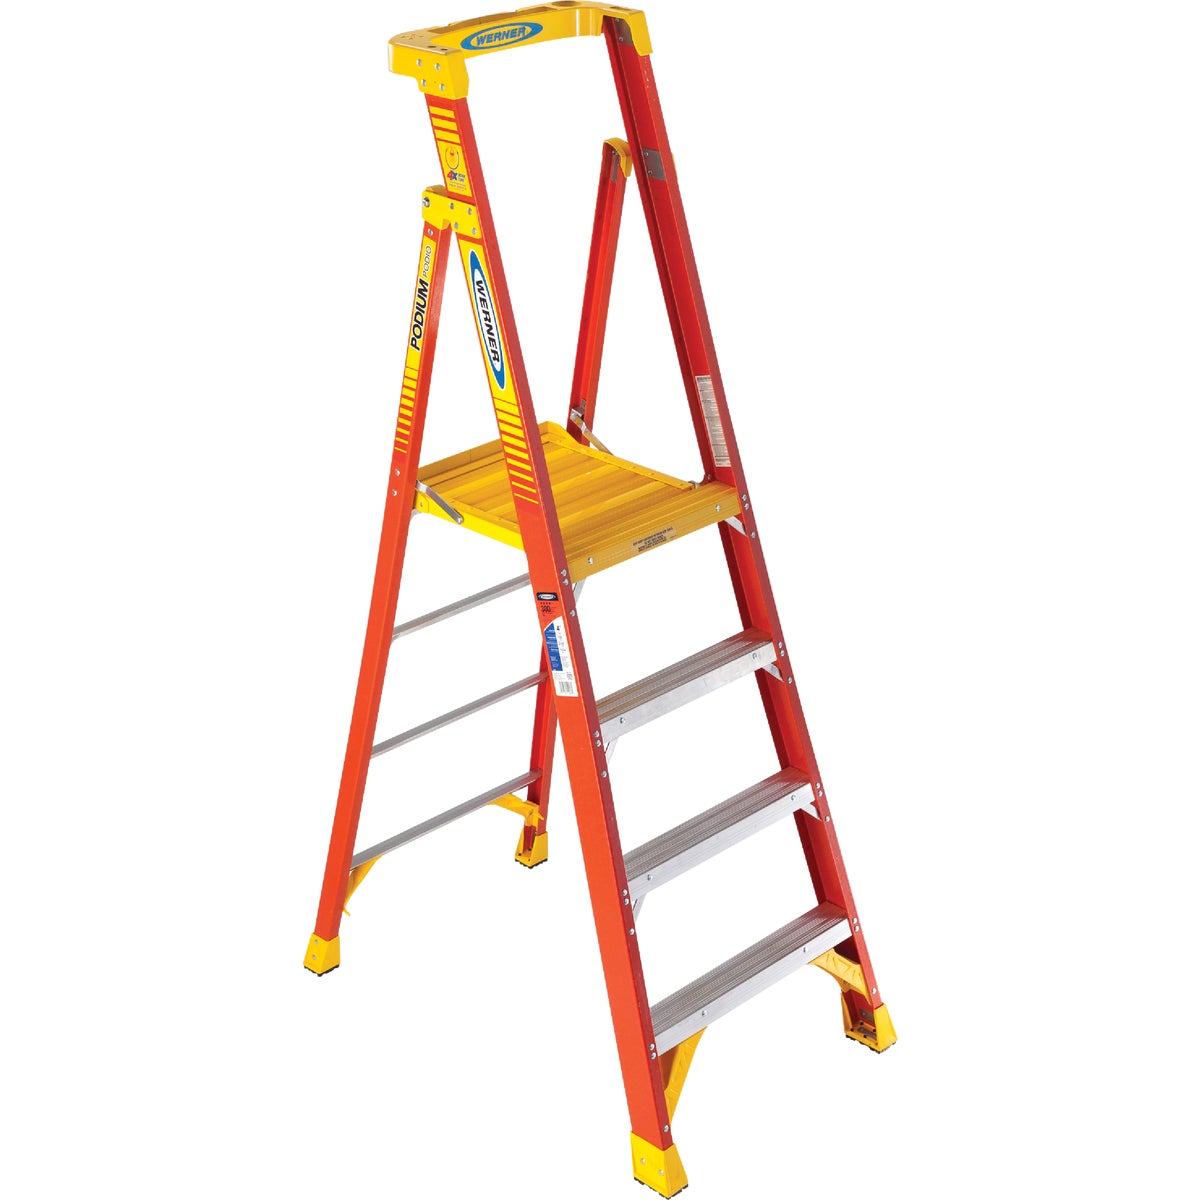 Werner 10 Ft. Reach Fiberglass Podium Ladder with 300 Lb. Load Capacity Type IA Ladder Rating